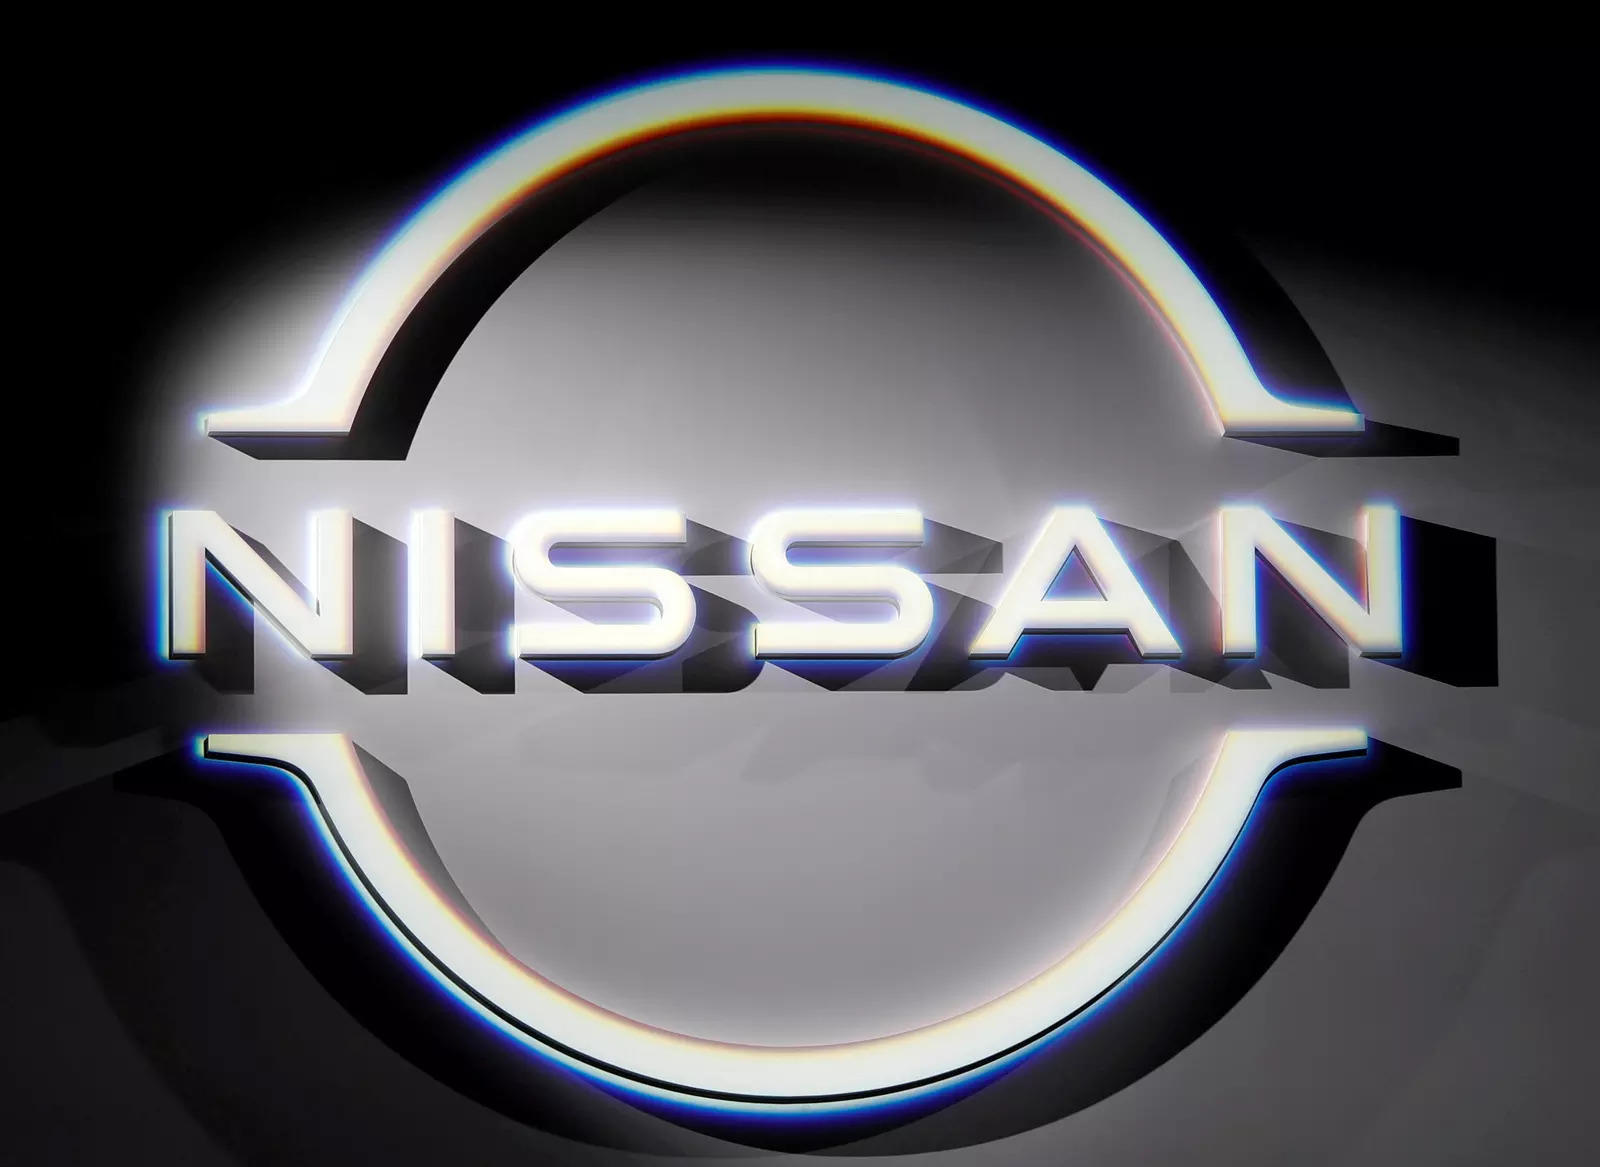 Nissan Motor India's wholesales in February 2020 were 1,029 units, according to the company.